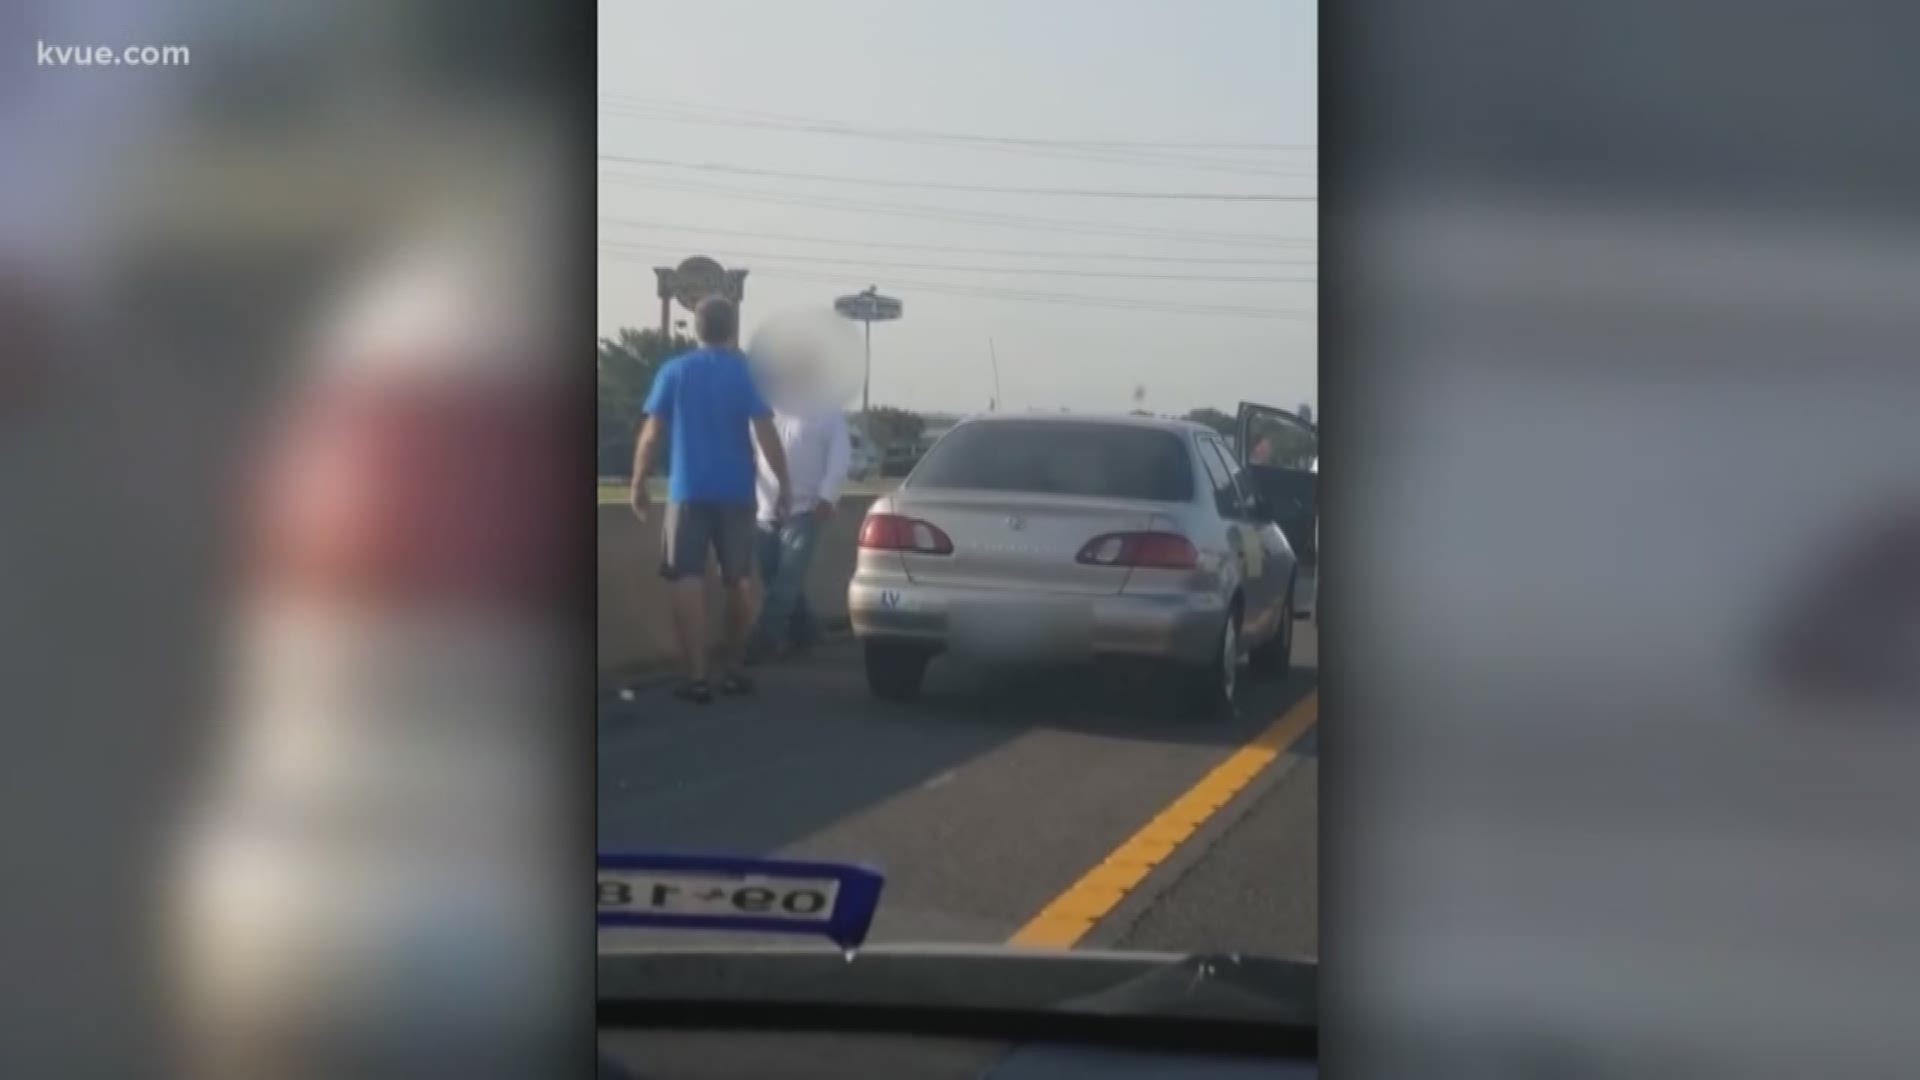 Two men were caught fighting alongside I-35 in Round Rock. A passing driver caught it all on tape.